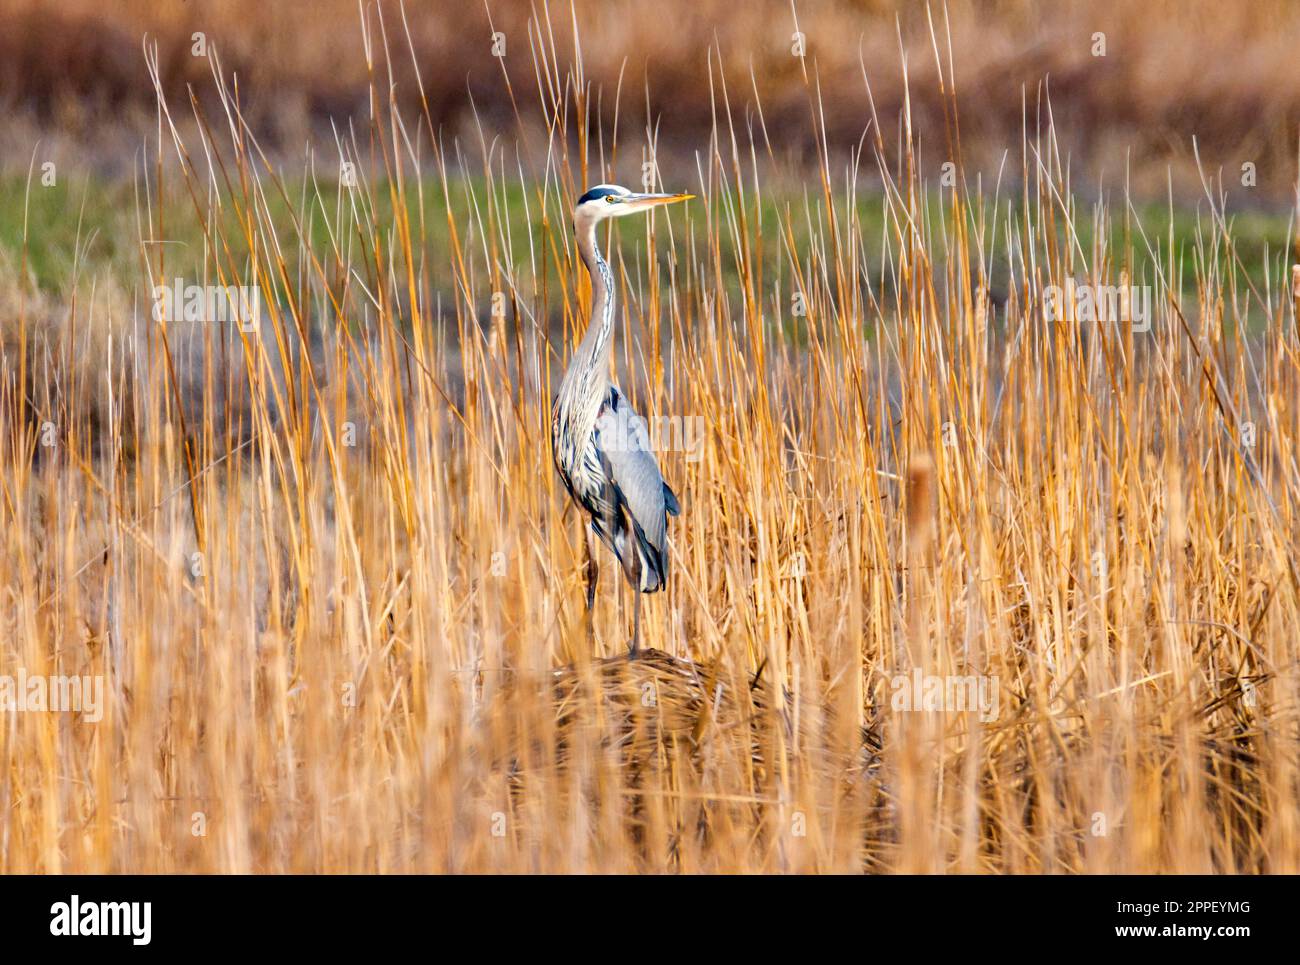 A Great Blue Heron (Ardea herodias) stands on a mound of cattails near the Eccles Center Nature Trail, Farmington Bay Waterfowl Management Area, Utah, Stock Photo